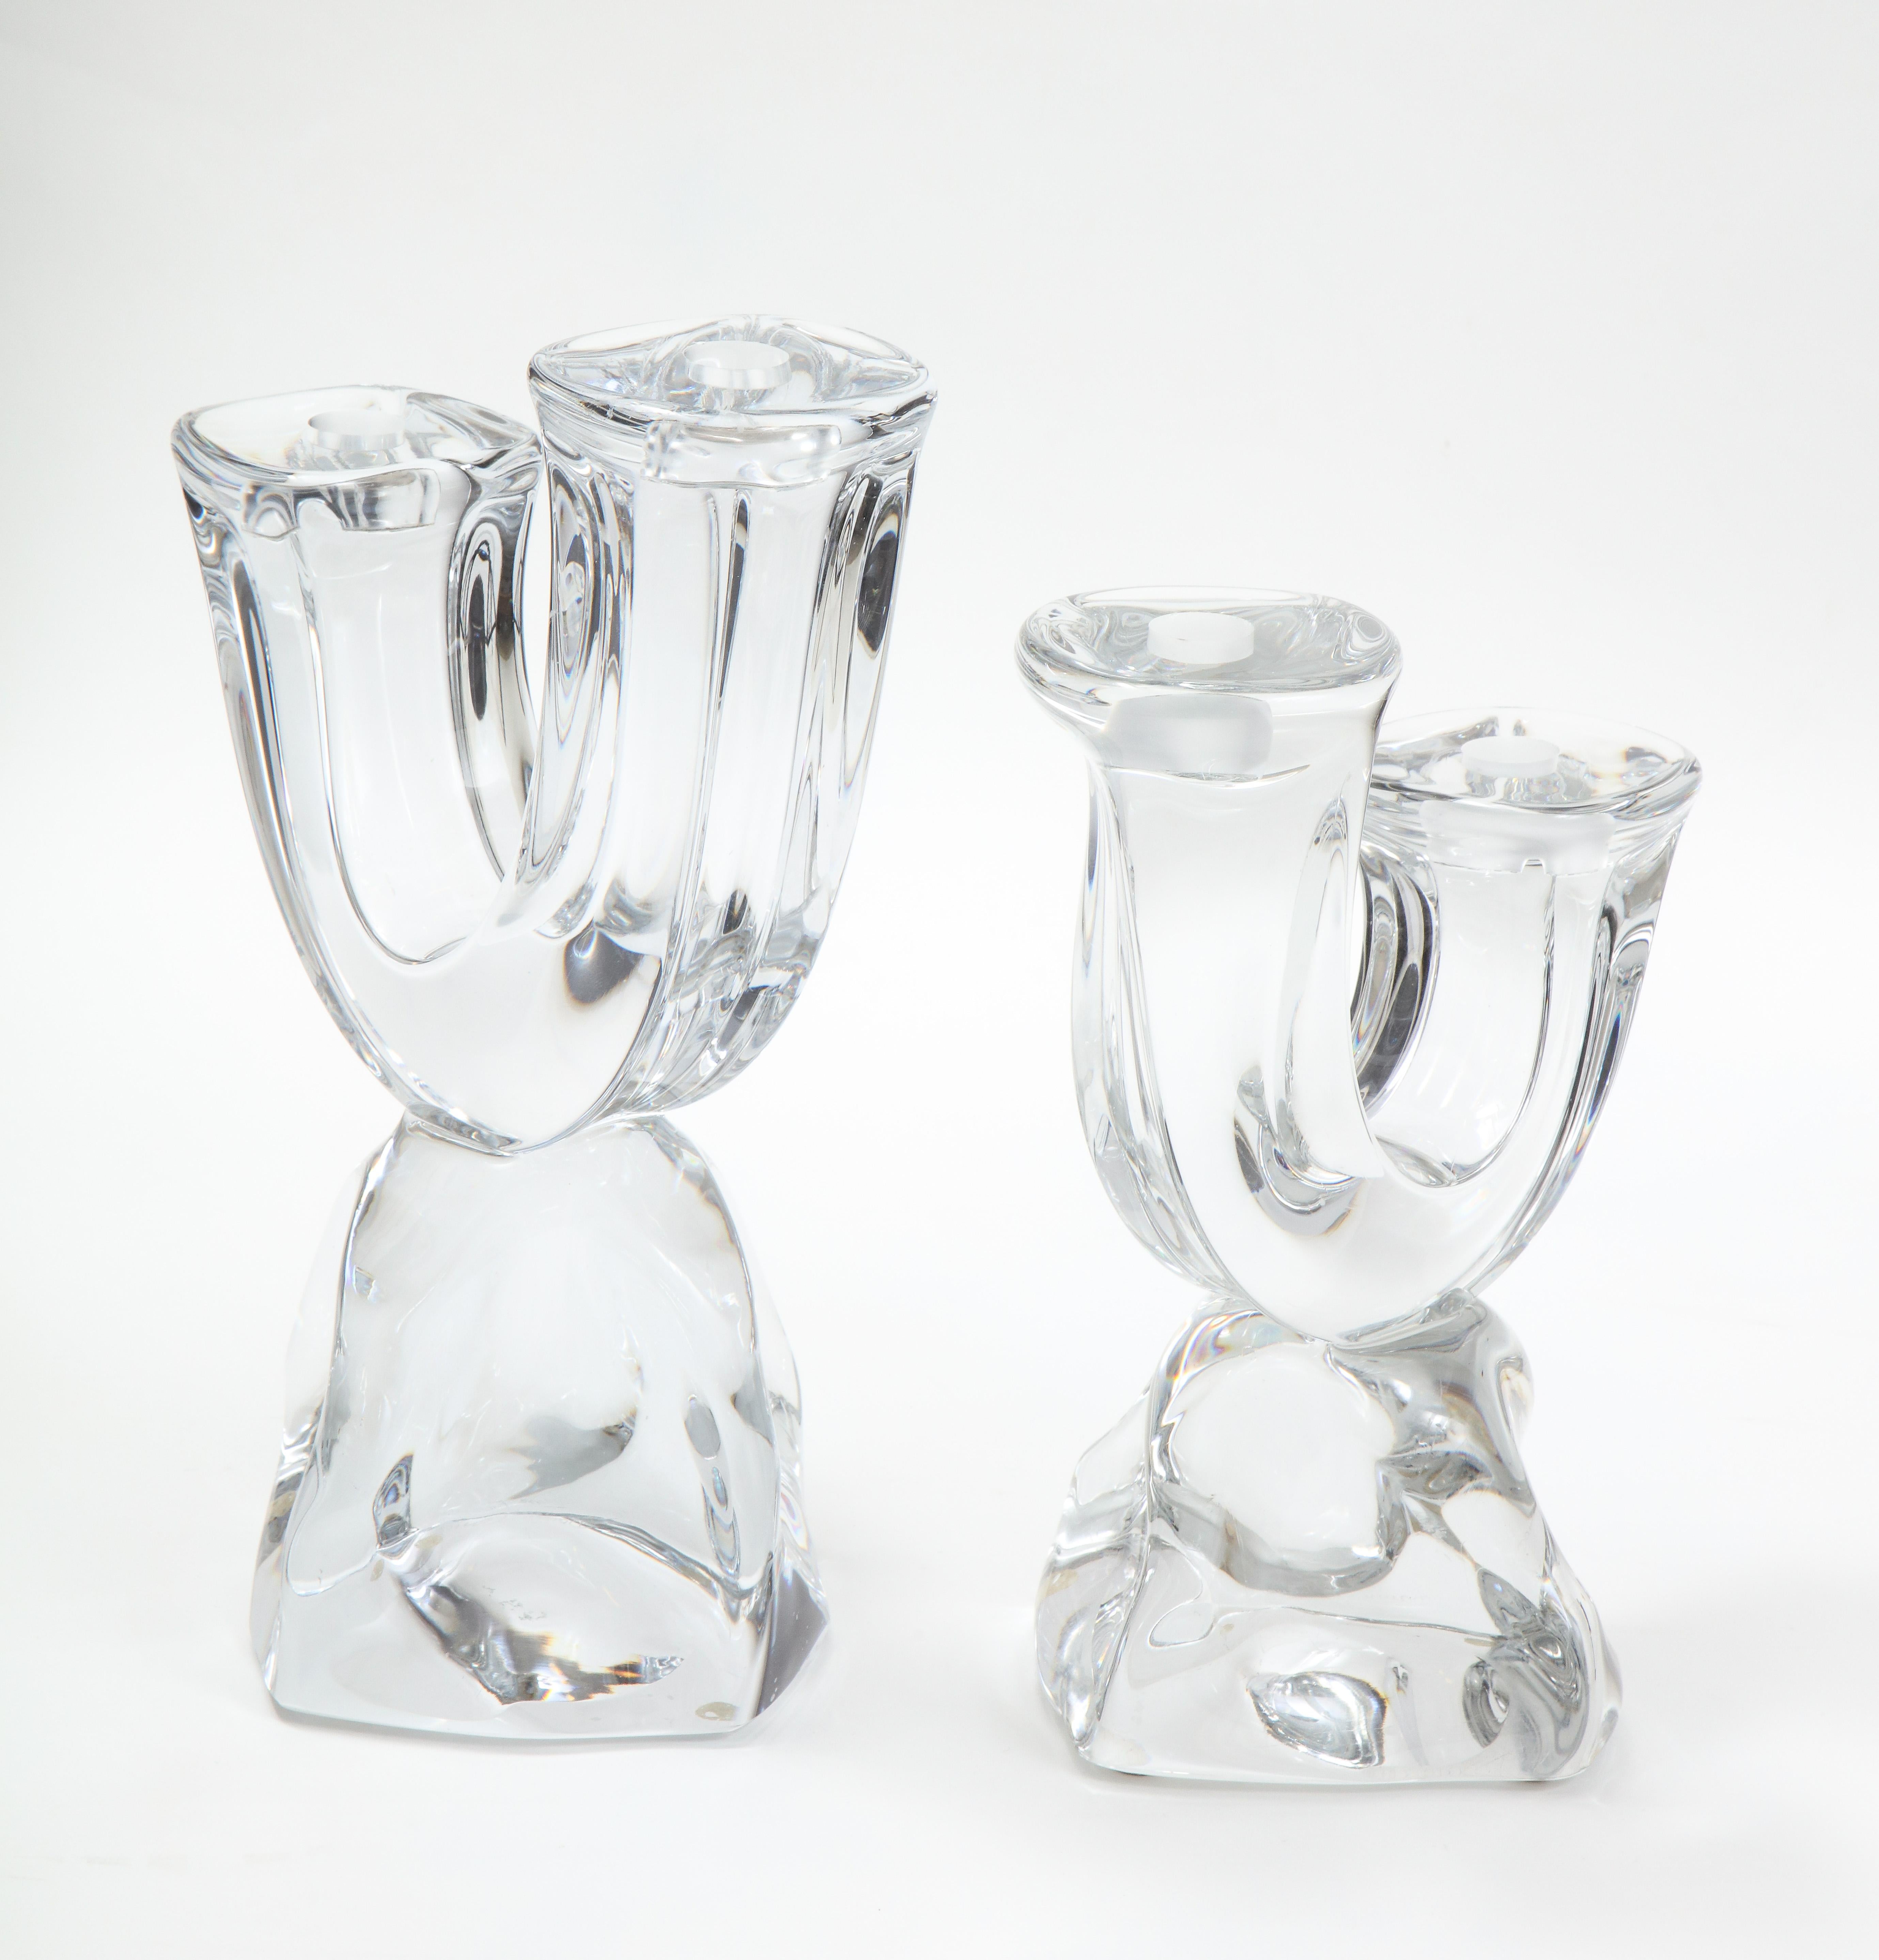 French Daum France Two-Arm Crystal Candle Holders